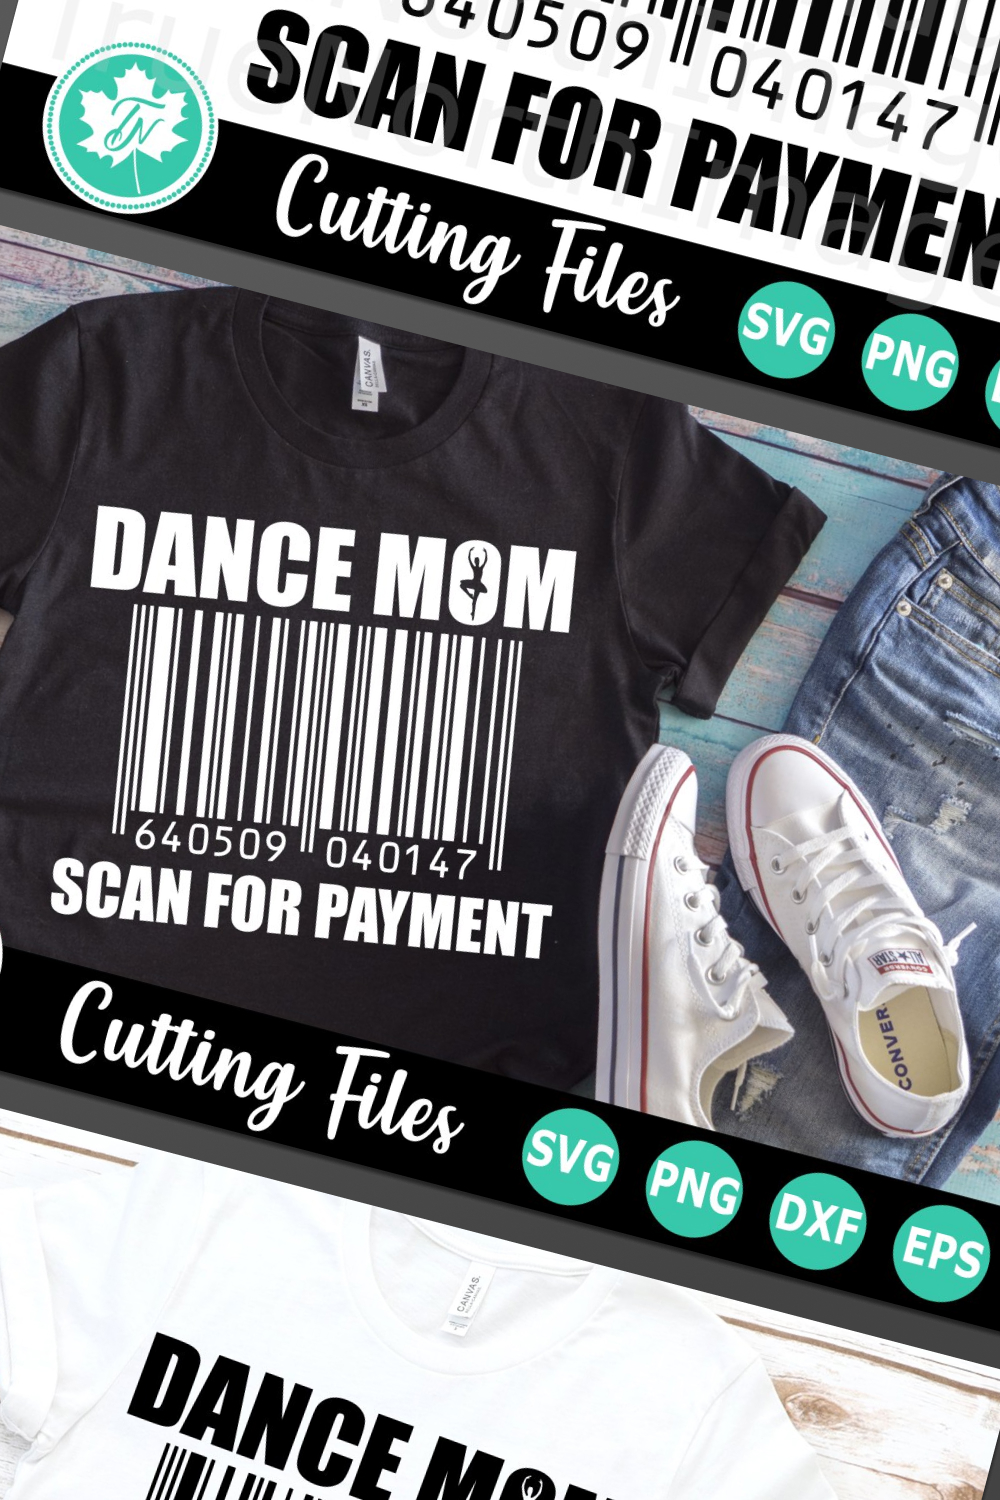 Awesome Dance Mom Barcode Print Clothing.